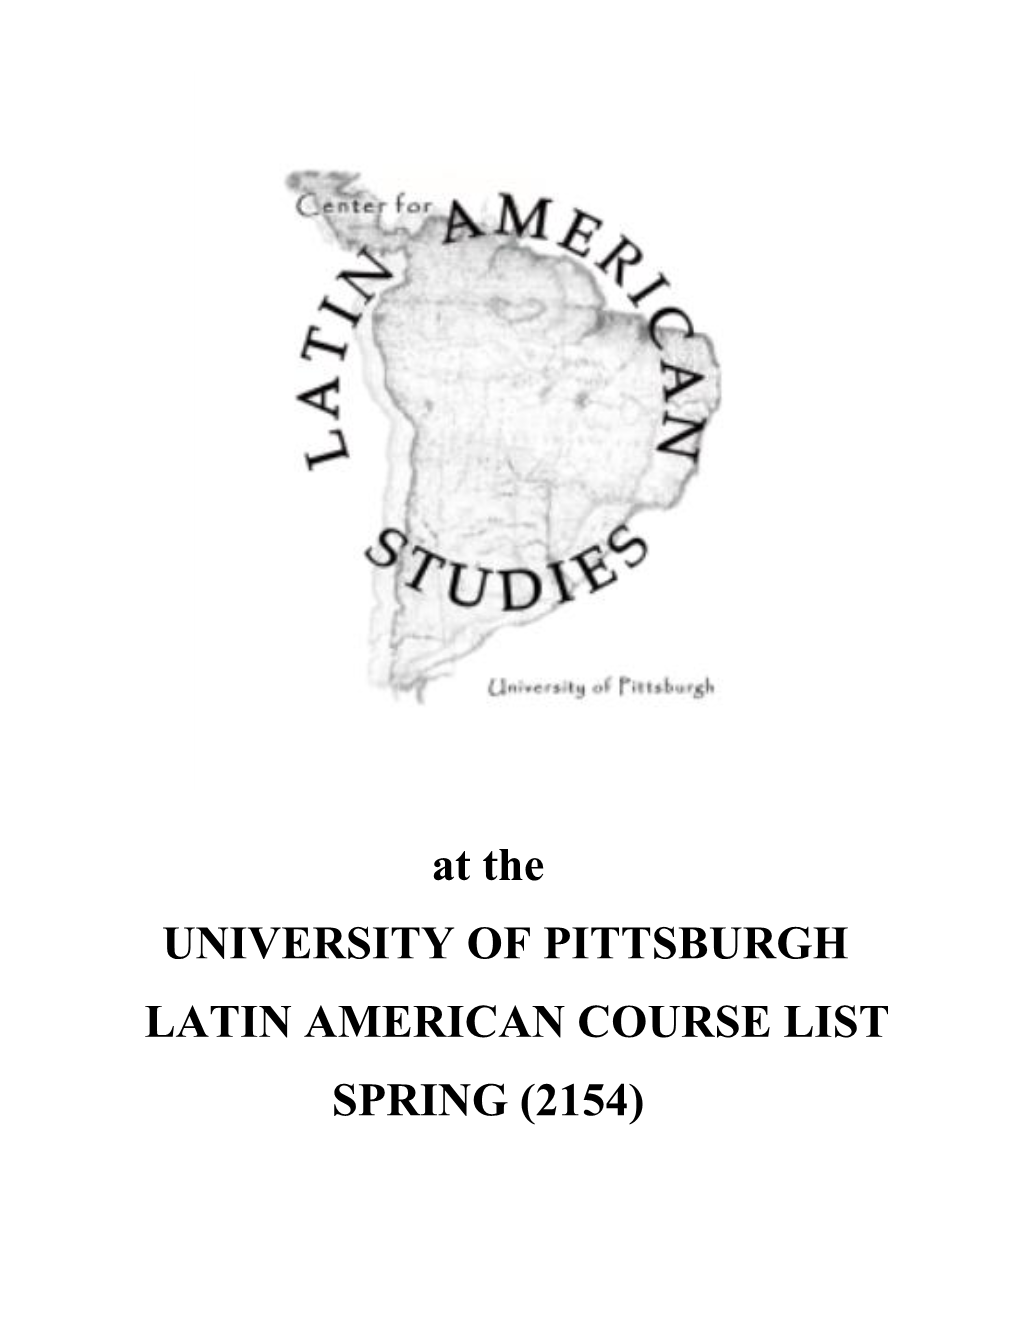 At the UNIVERSITY of PITTSBURGH LATIN AMERICAN COURSE LIST SPRING (2154)